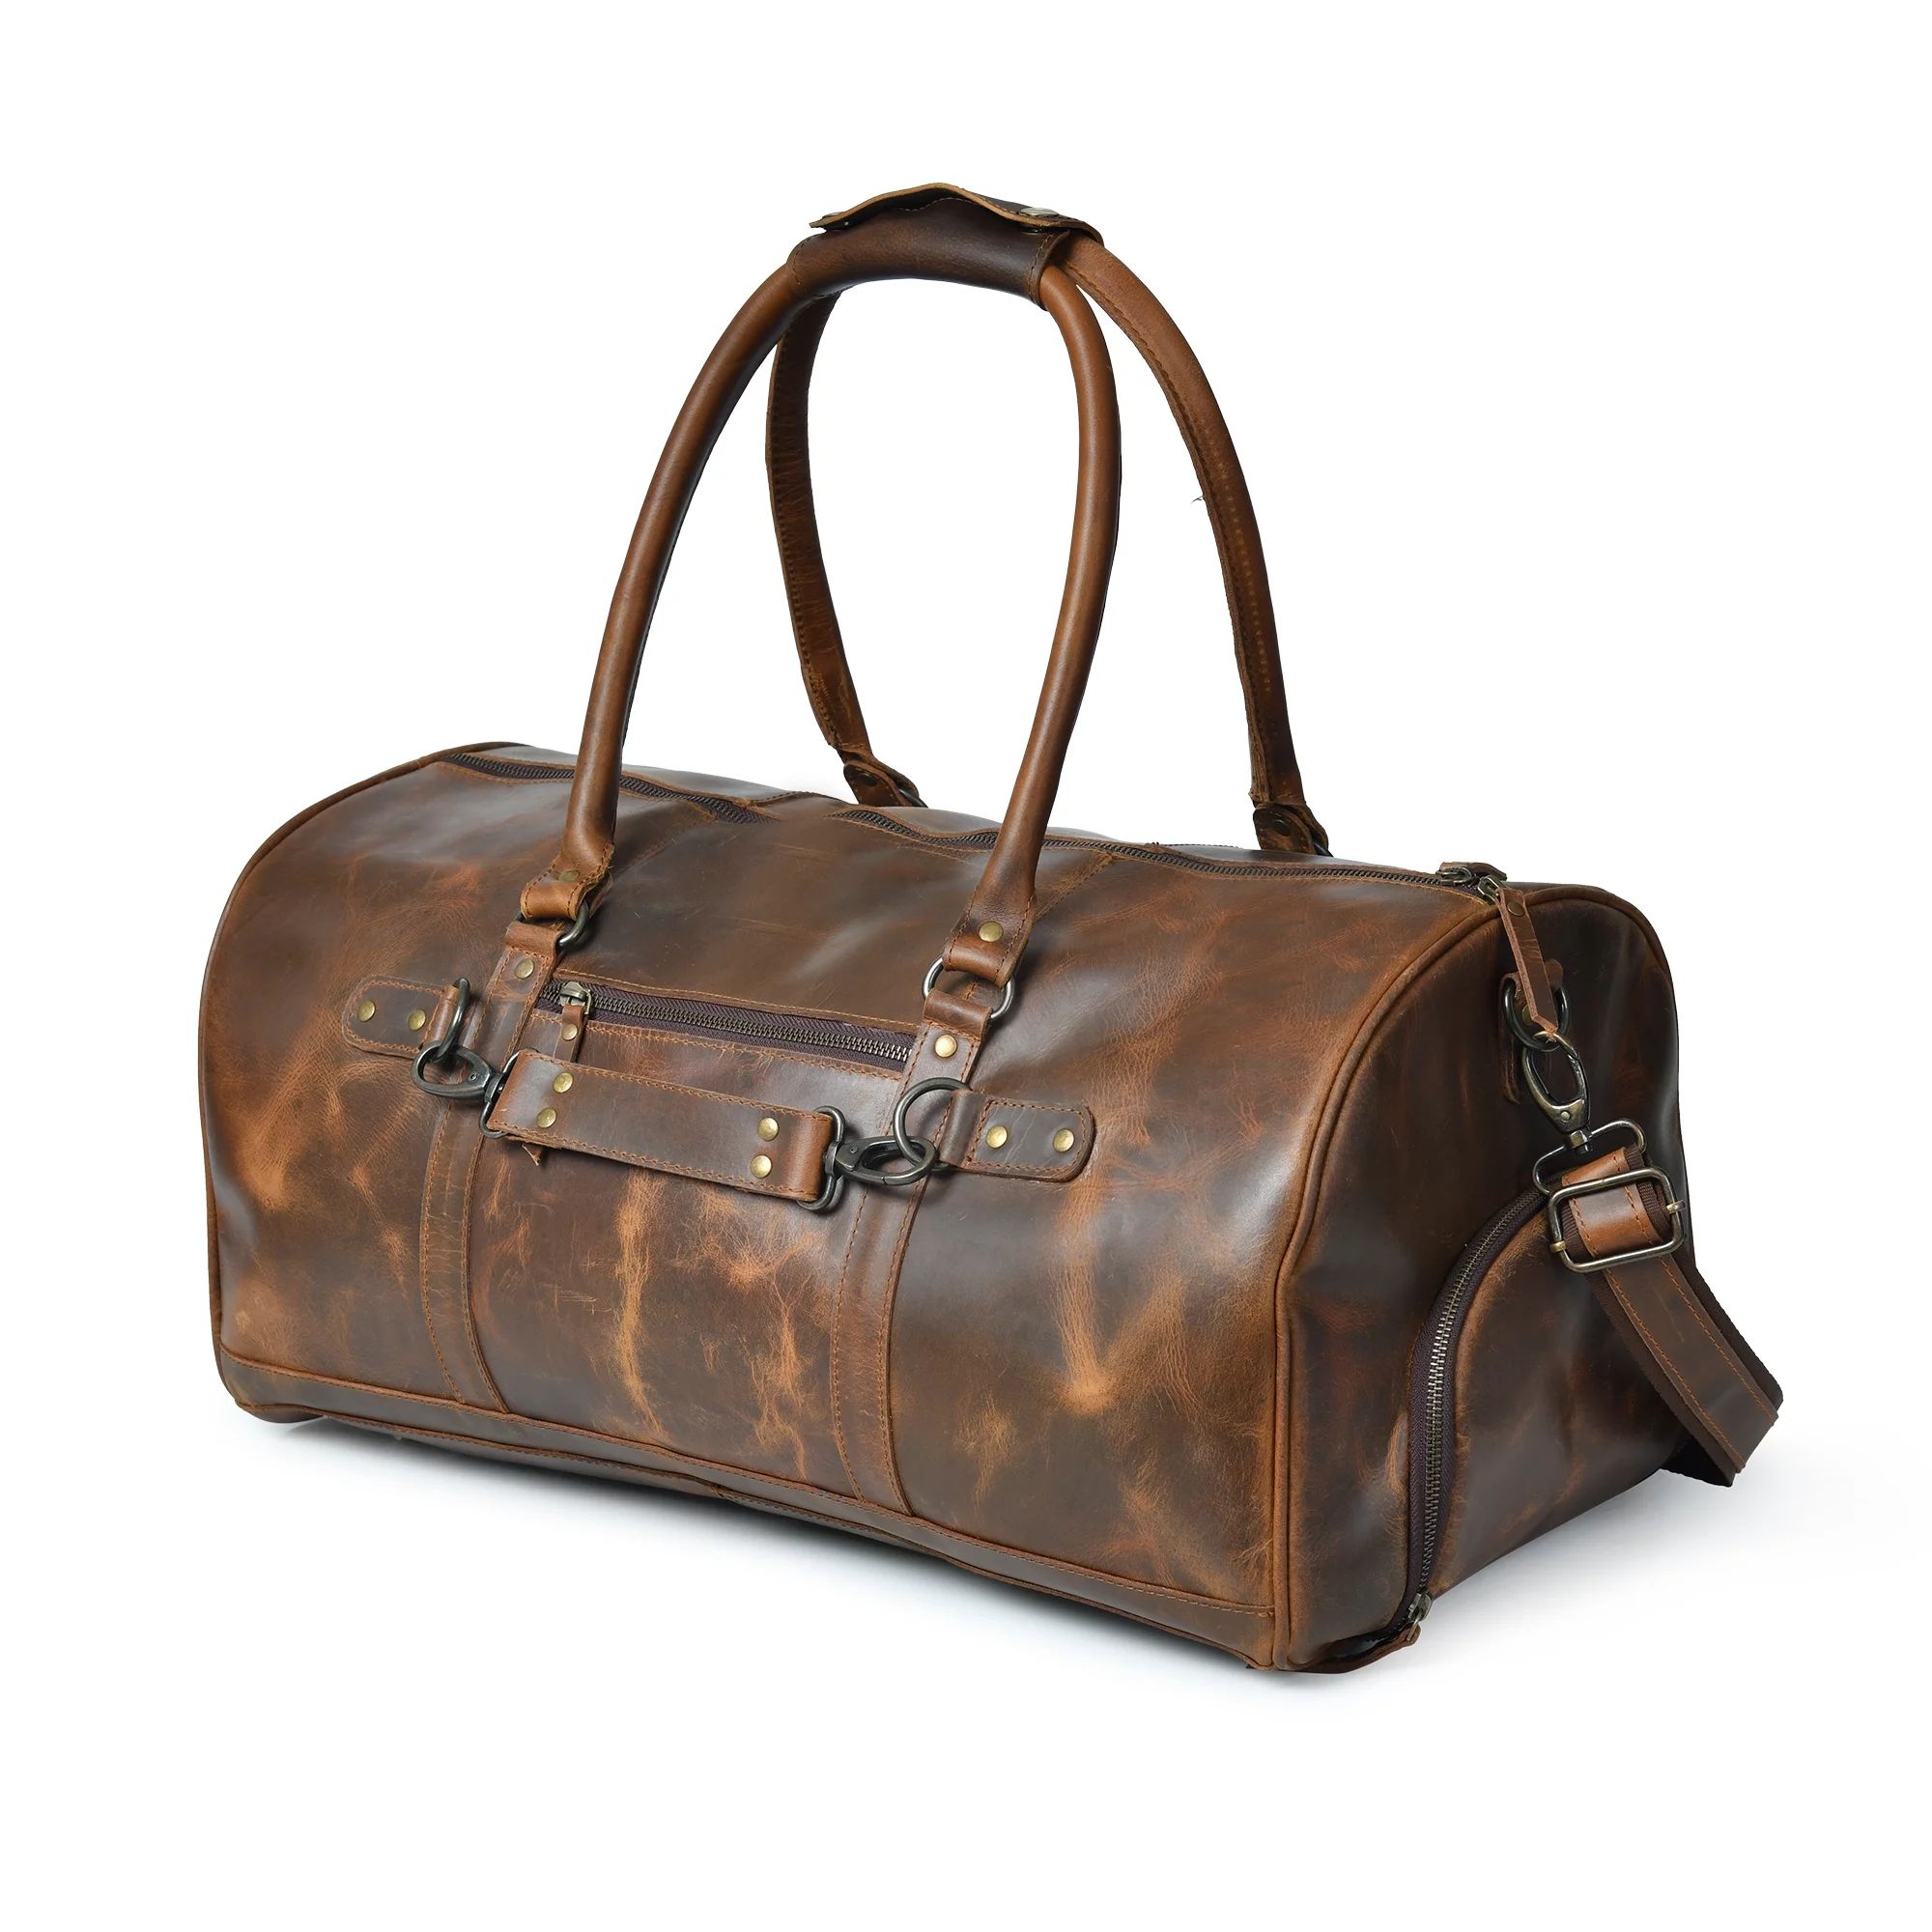 Handmade Top Grain Leather Duffle Bag | Carry On Leather Weekender Travel Duffel Bags for Men by ... | Walmart (US)